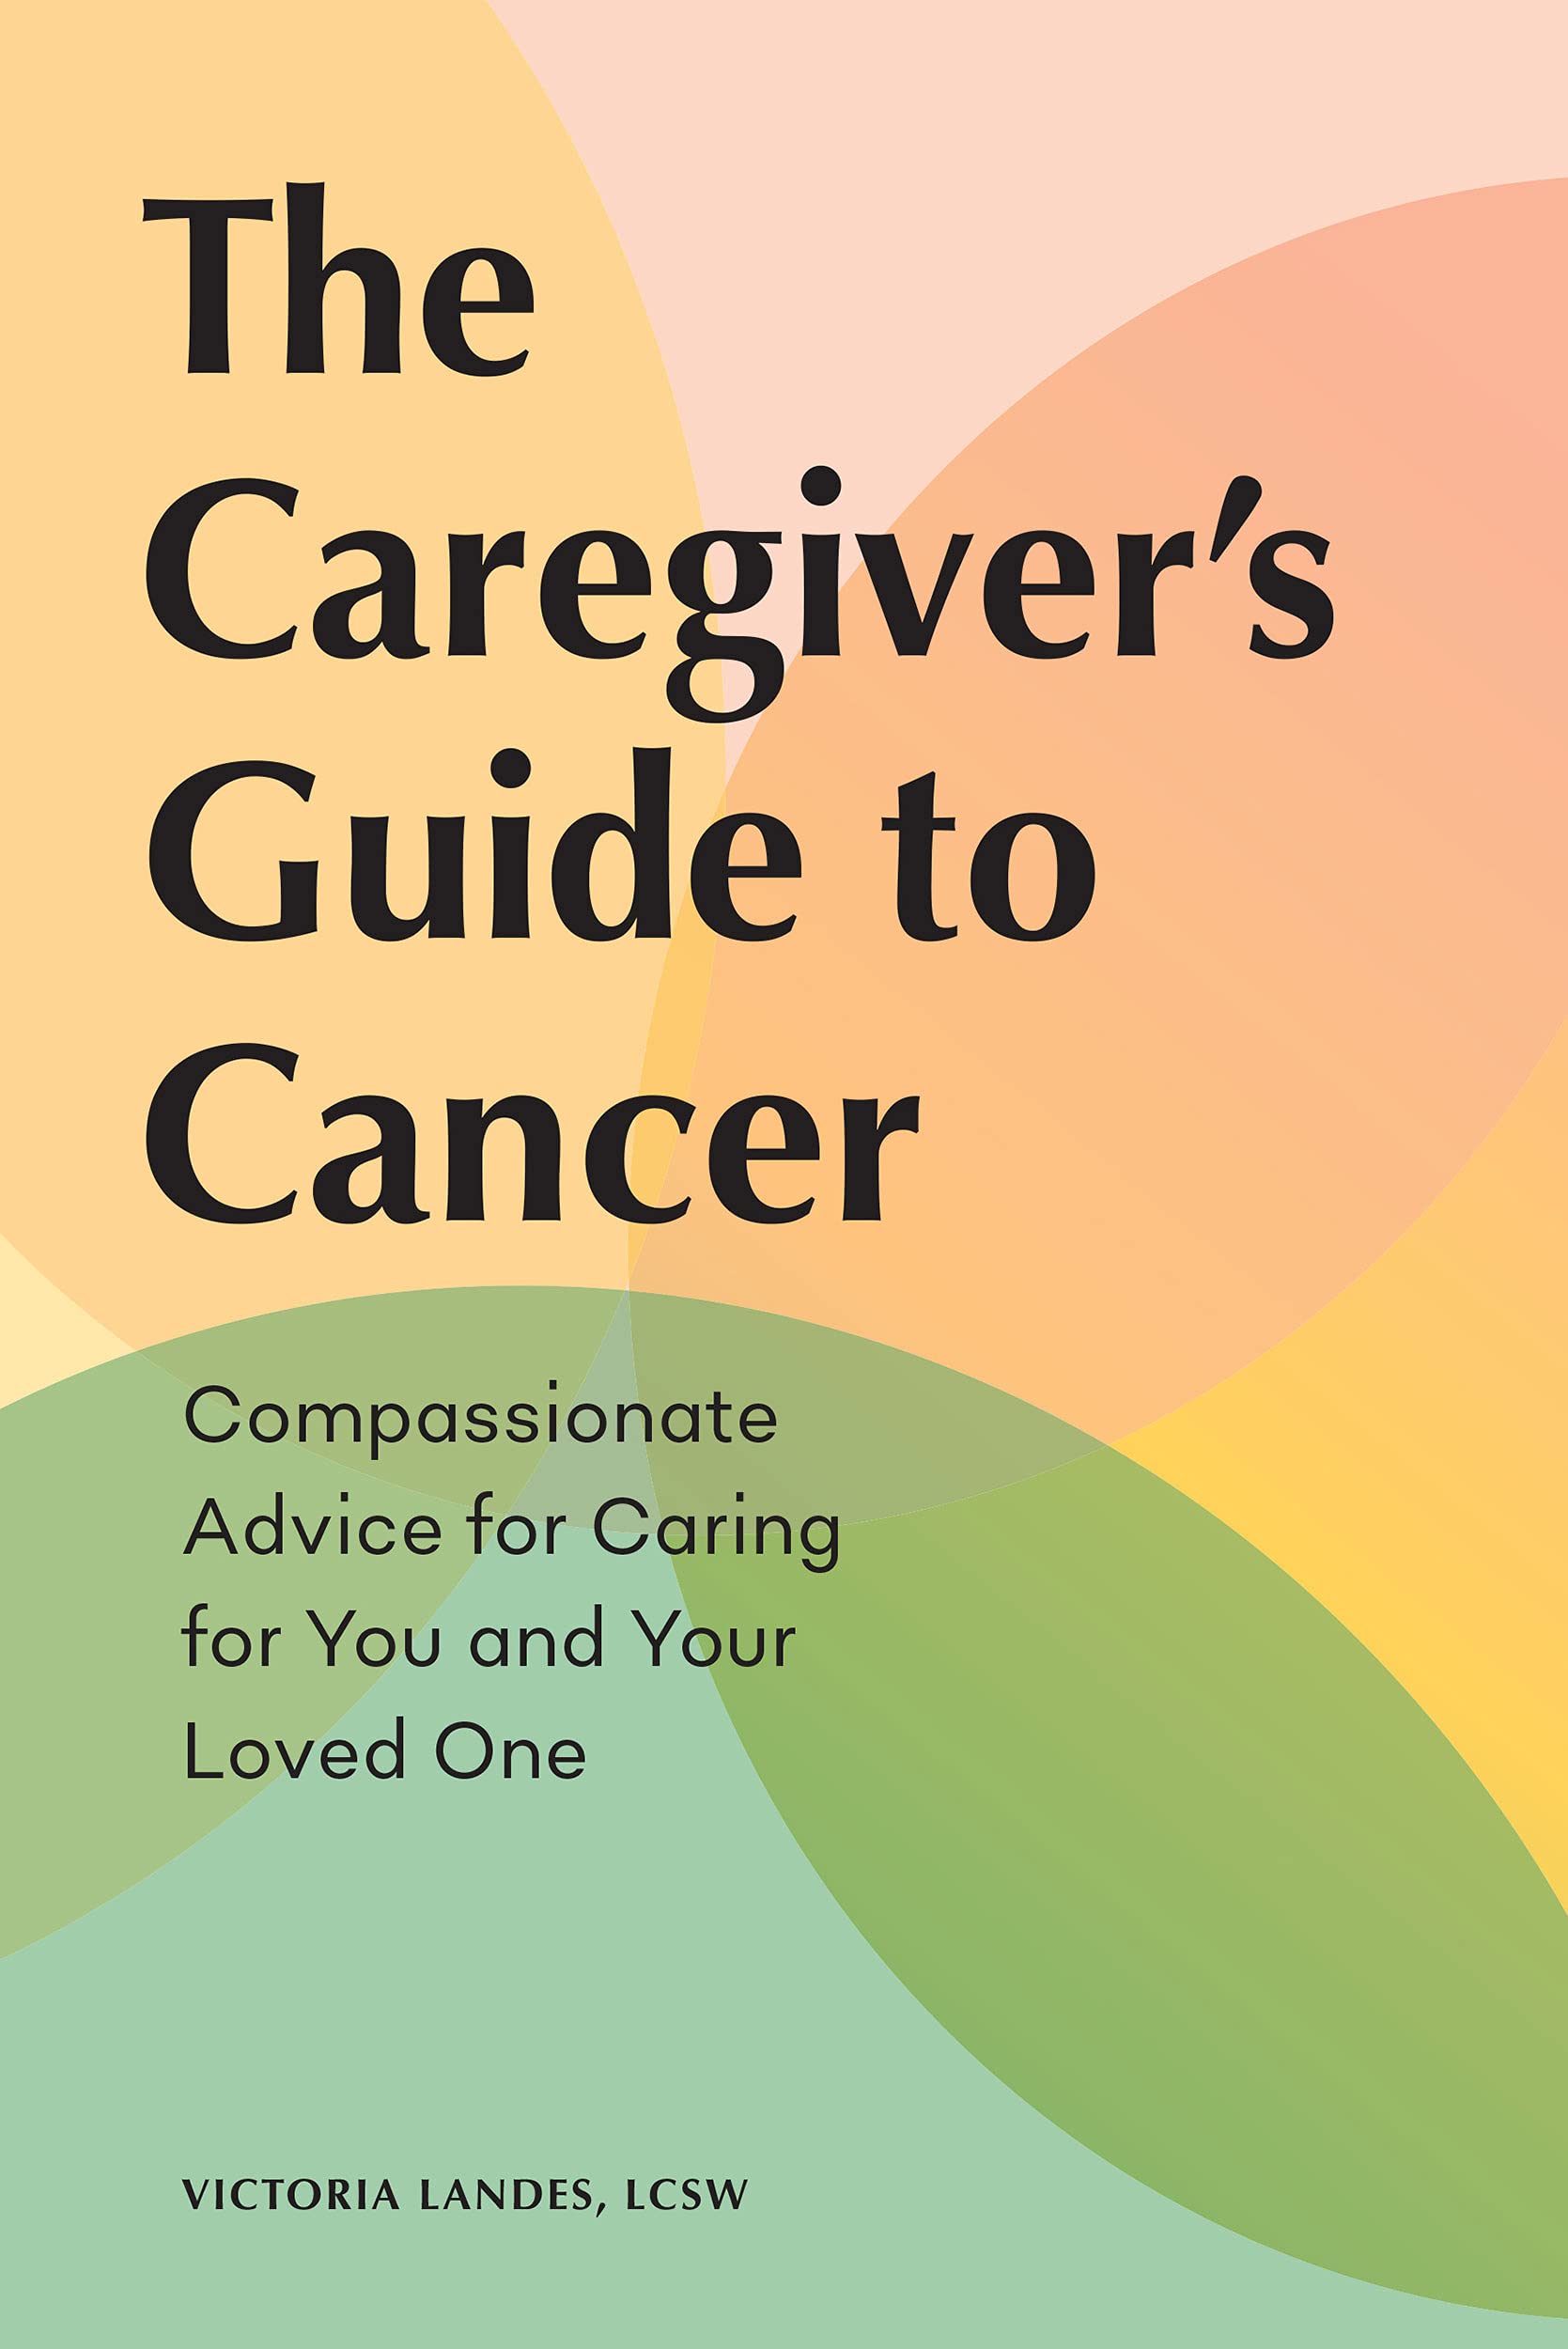 Caregiver's Guide to Cancer book cover